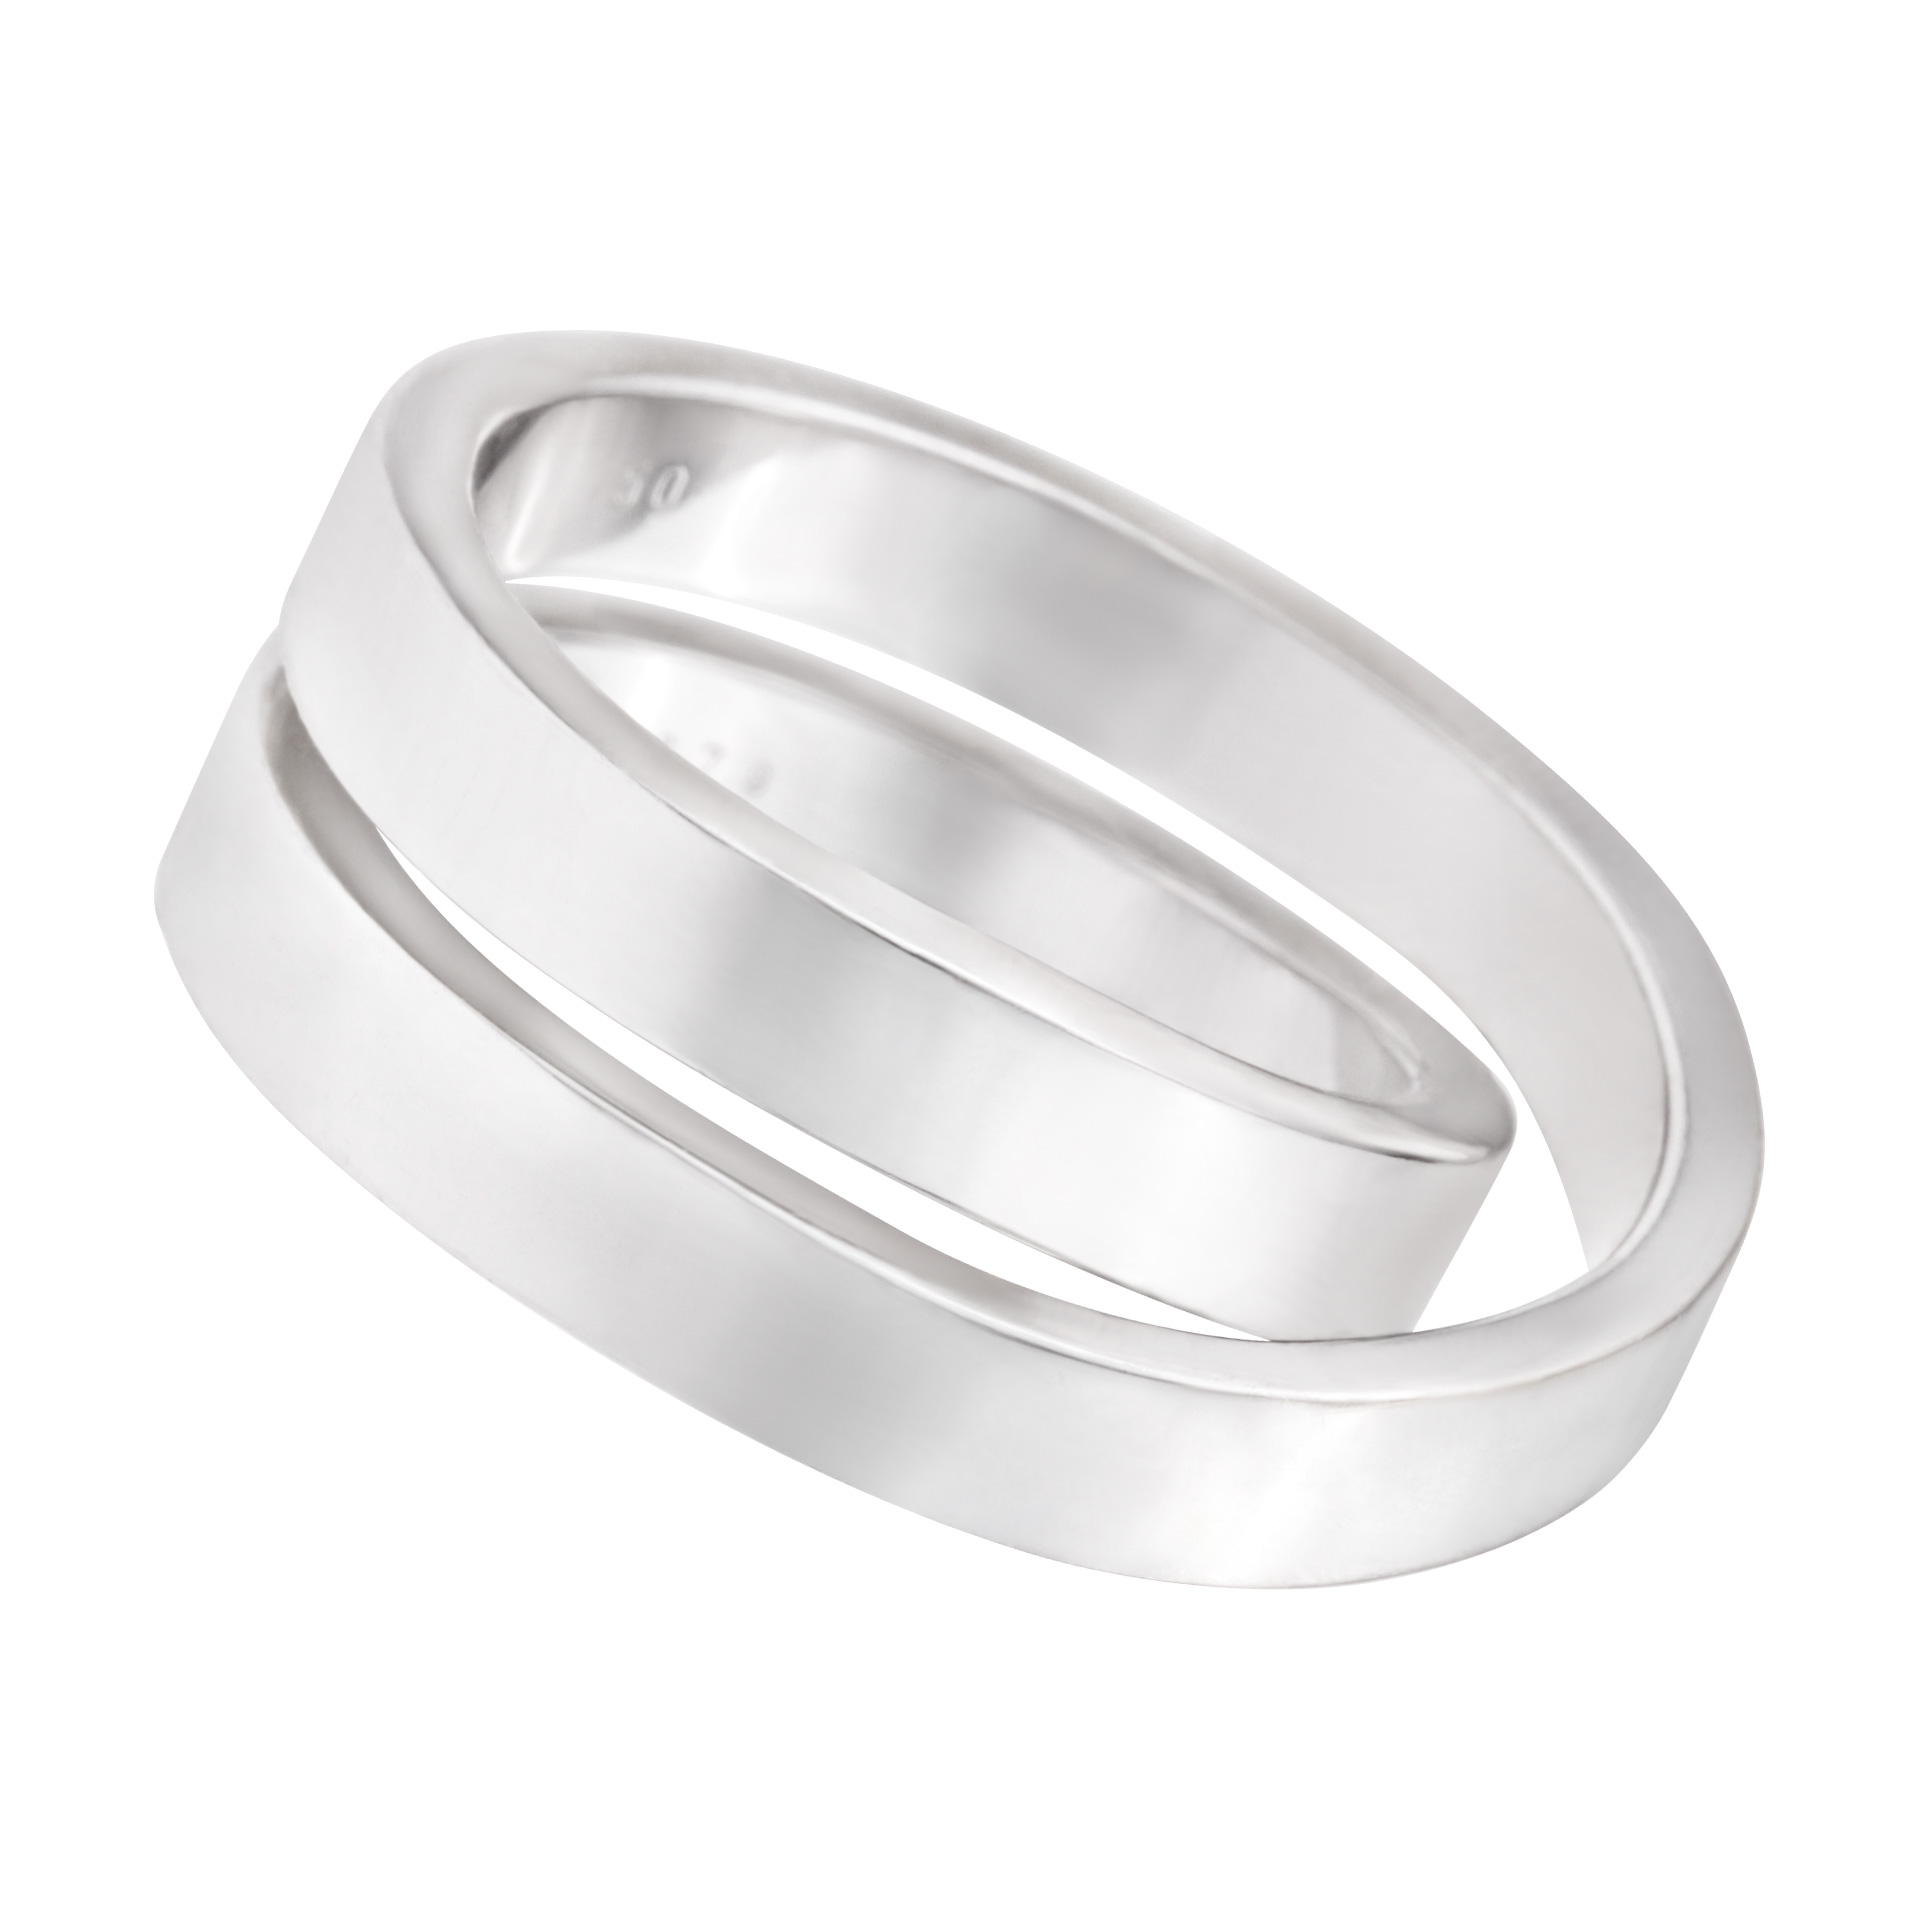 Cartier Crossover ring in 18k white gold